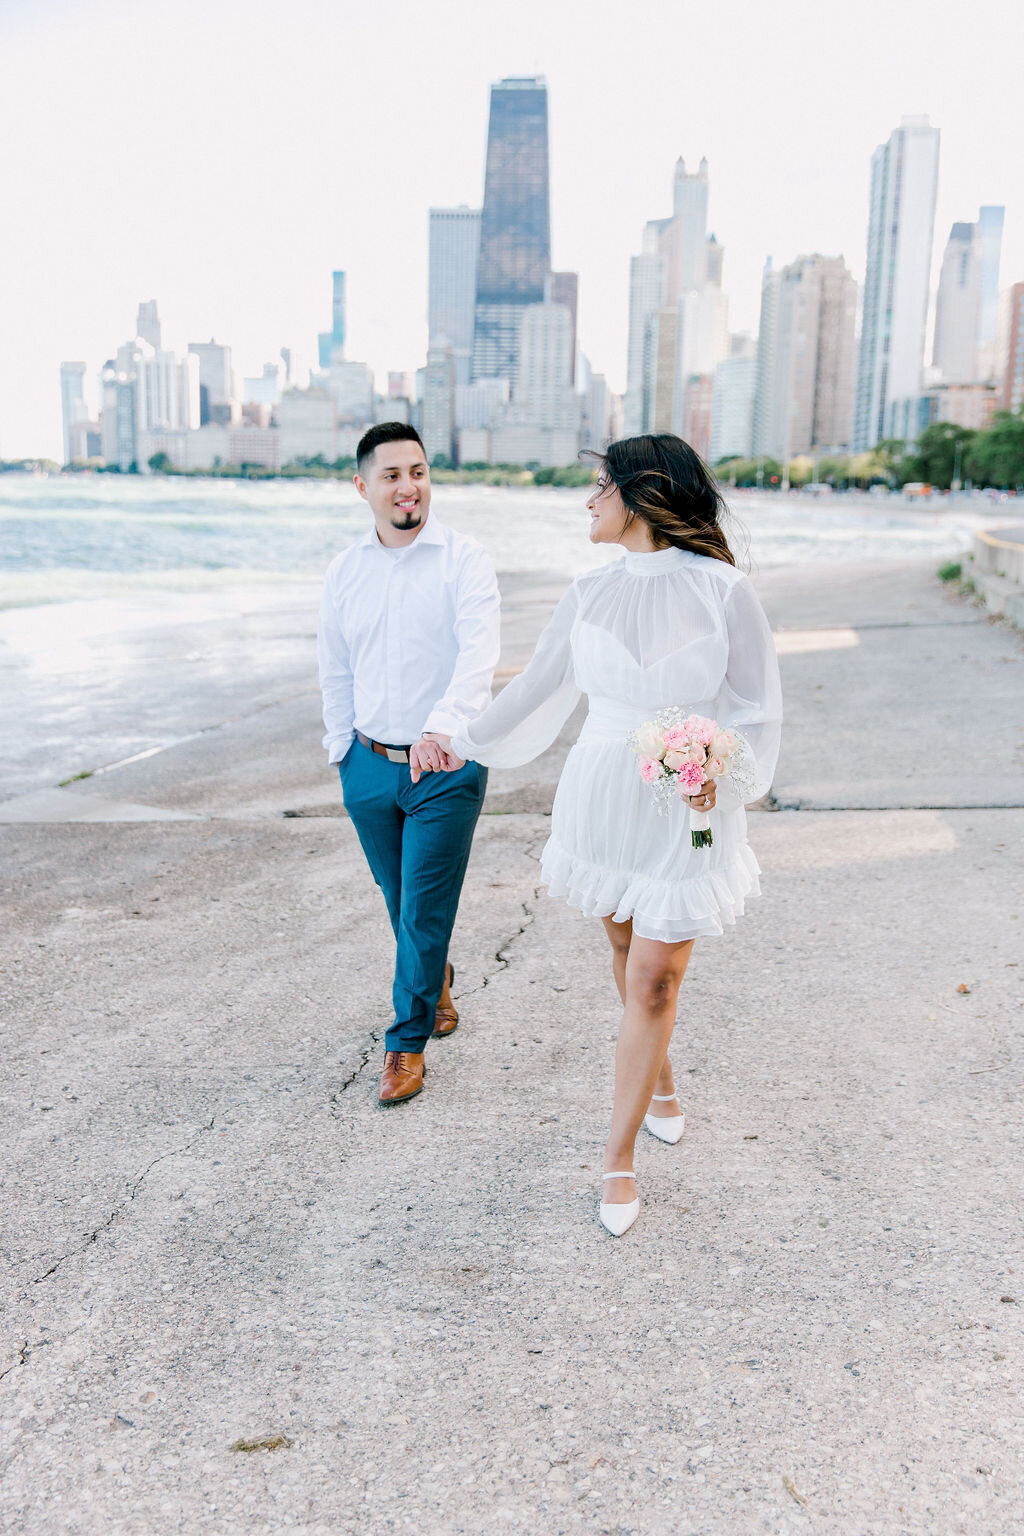 Joyful bride and groom sharing a laugh, with Chicago's iconic skyline, including the Willis Tower, forming a majestic backdro